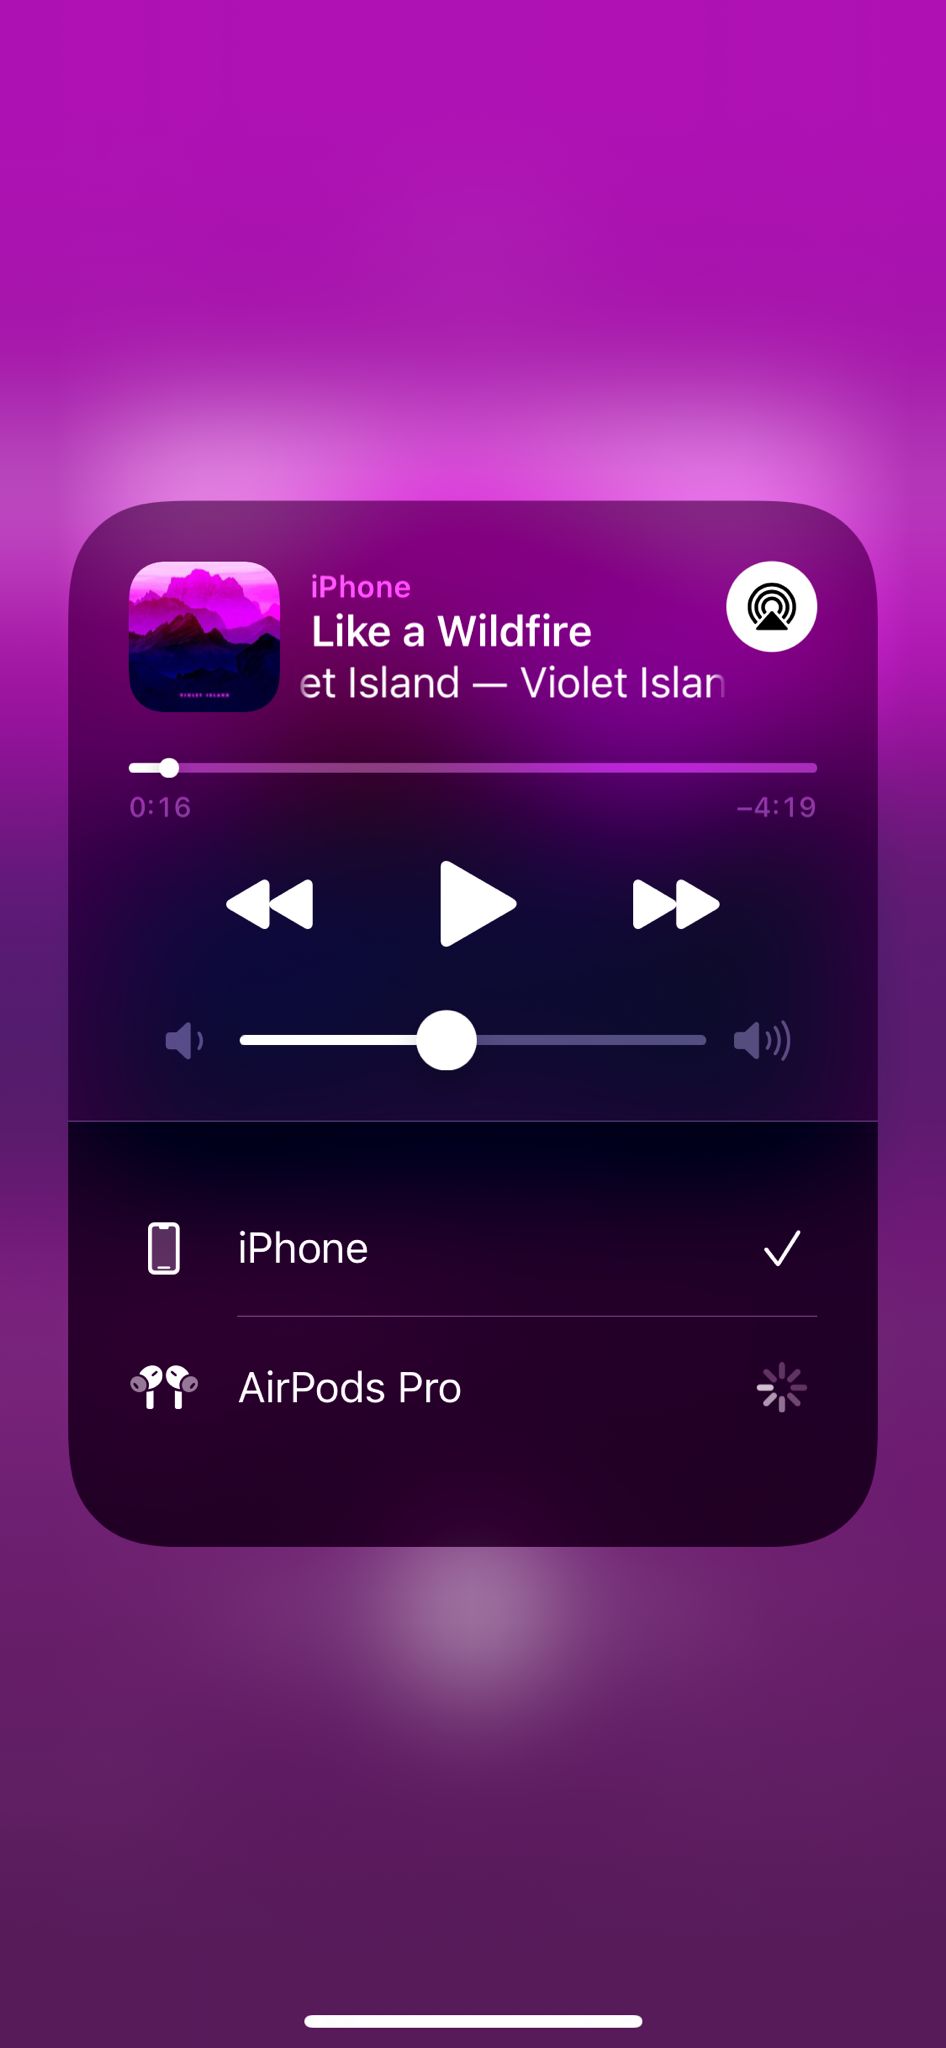 AirPods connected but phone playing… Apple